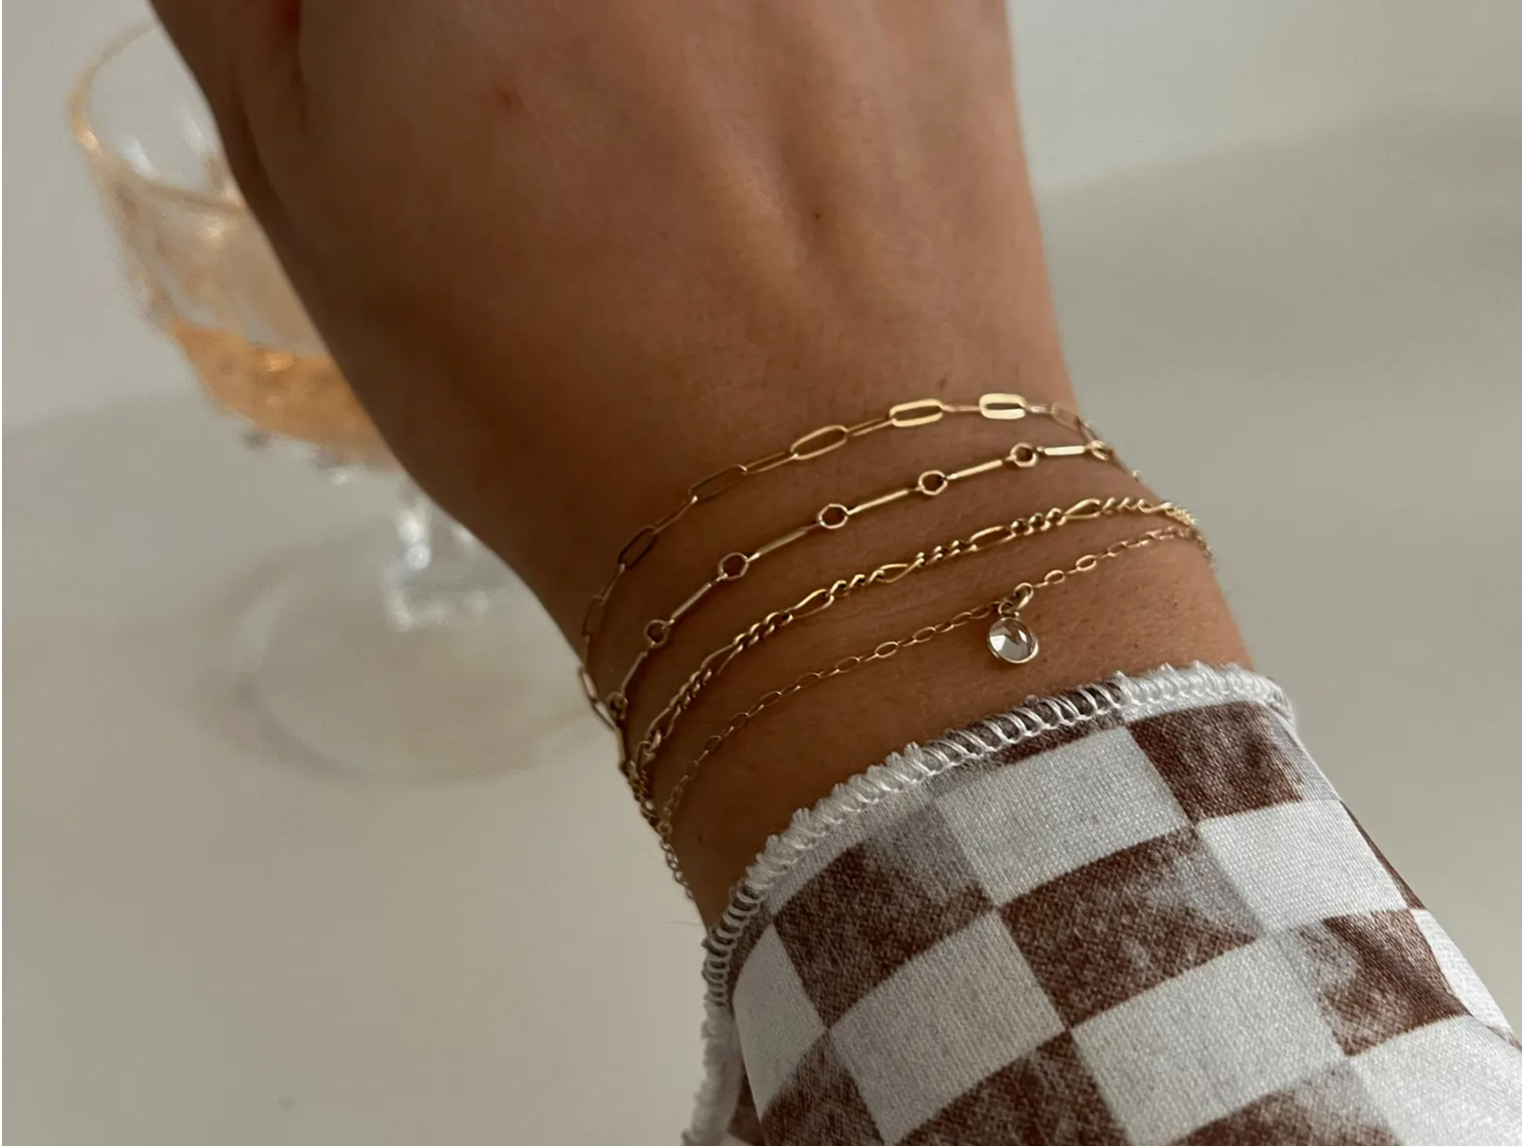 Permanent Forever Bracelets - Book Now - Alexandra Marks Jewelry Chicago - Go Viral!